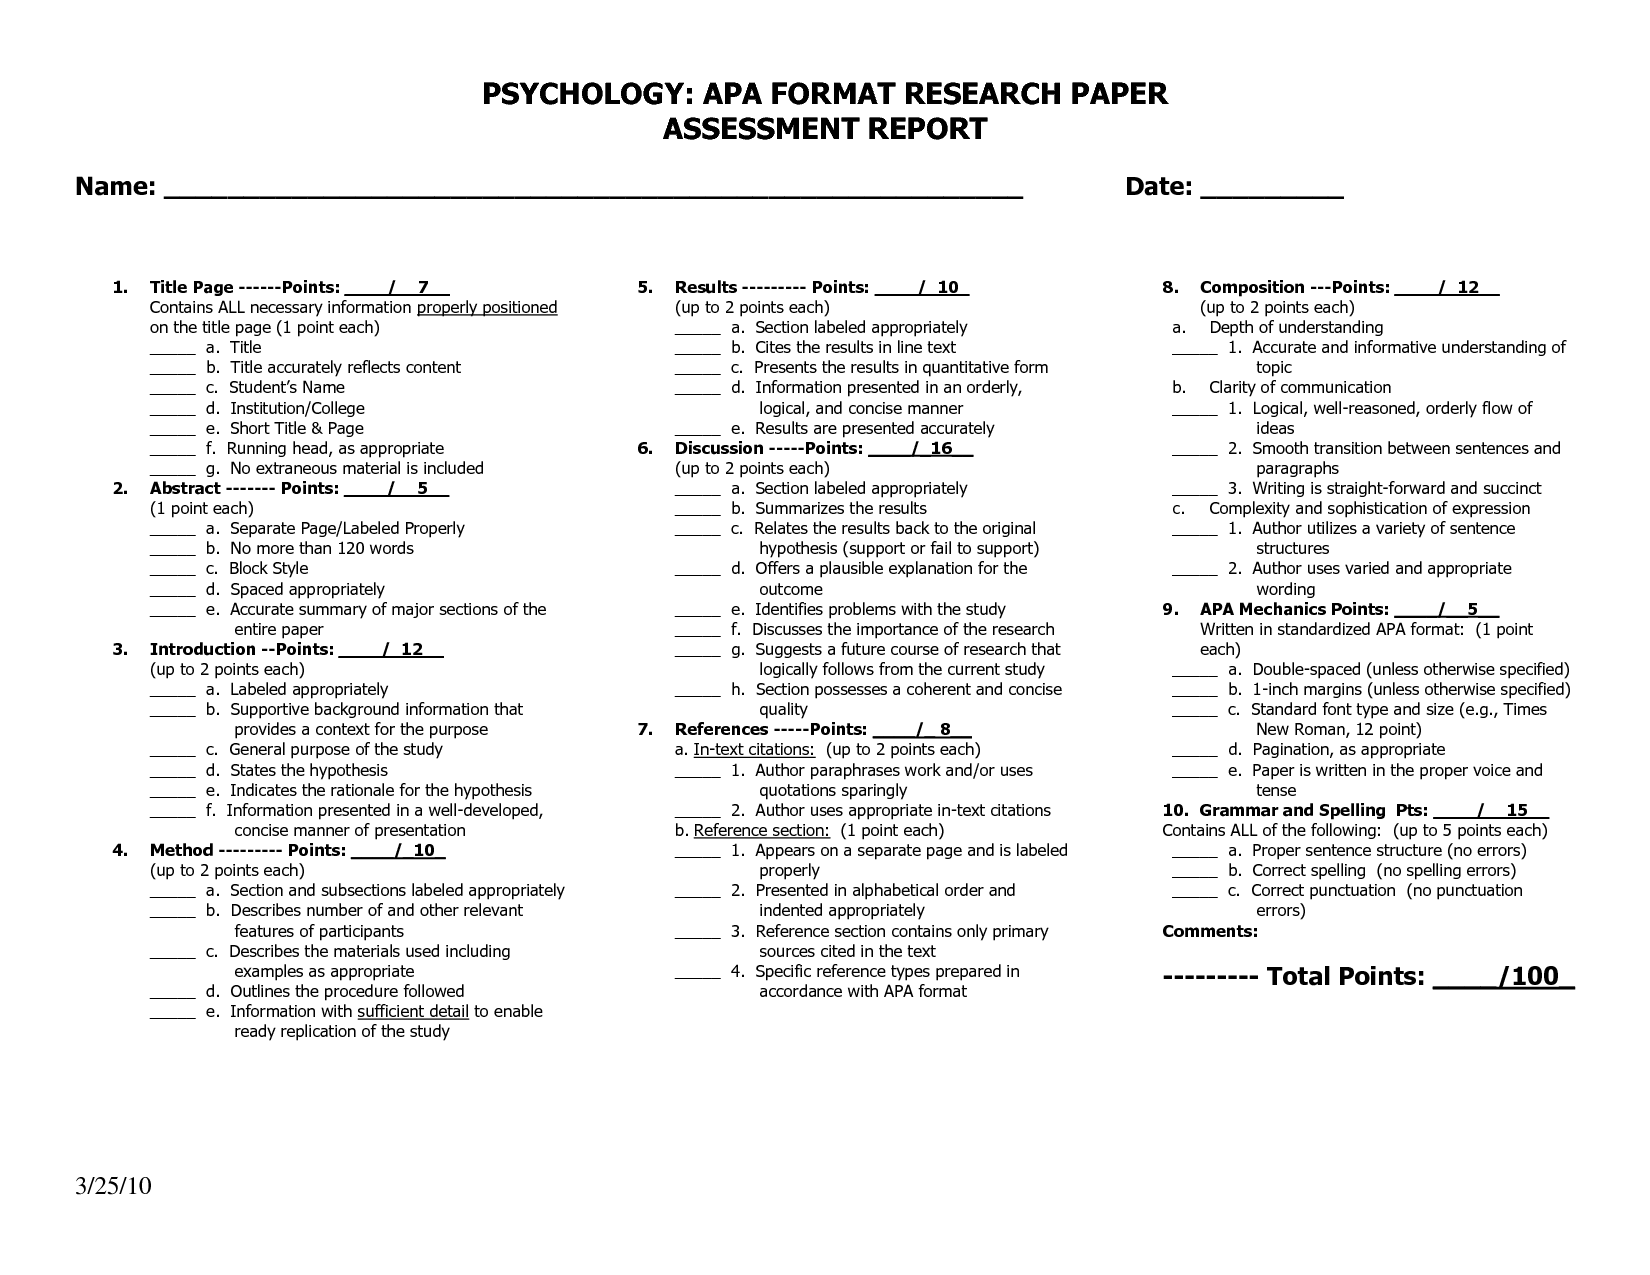 format of the research paper